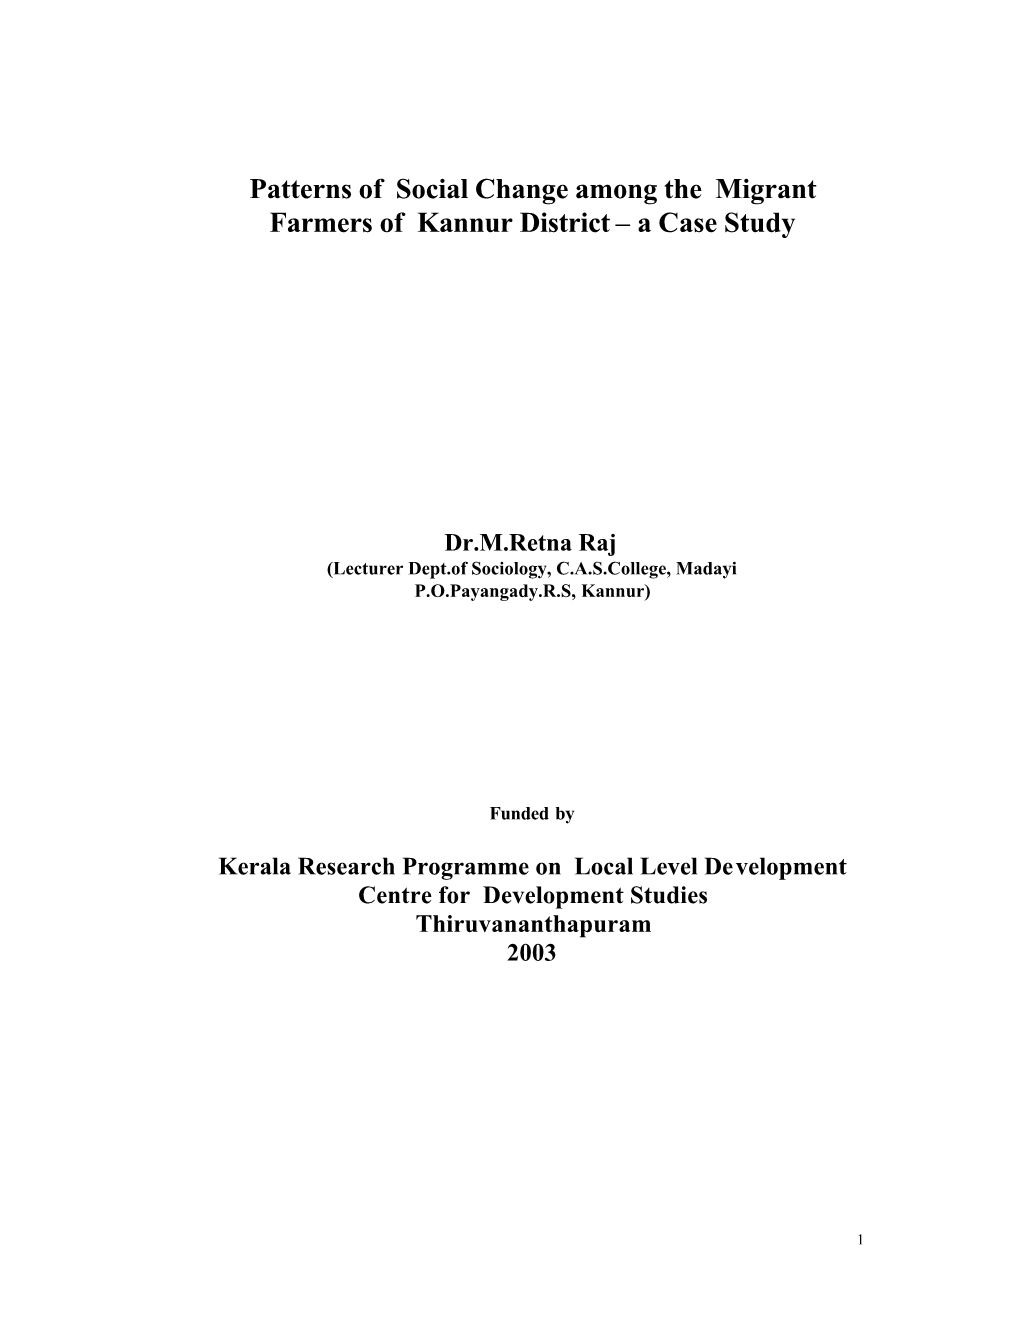 Patterns of Social Change Among the Migrant Farmers of Kannur District – a Case Study